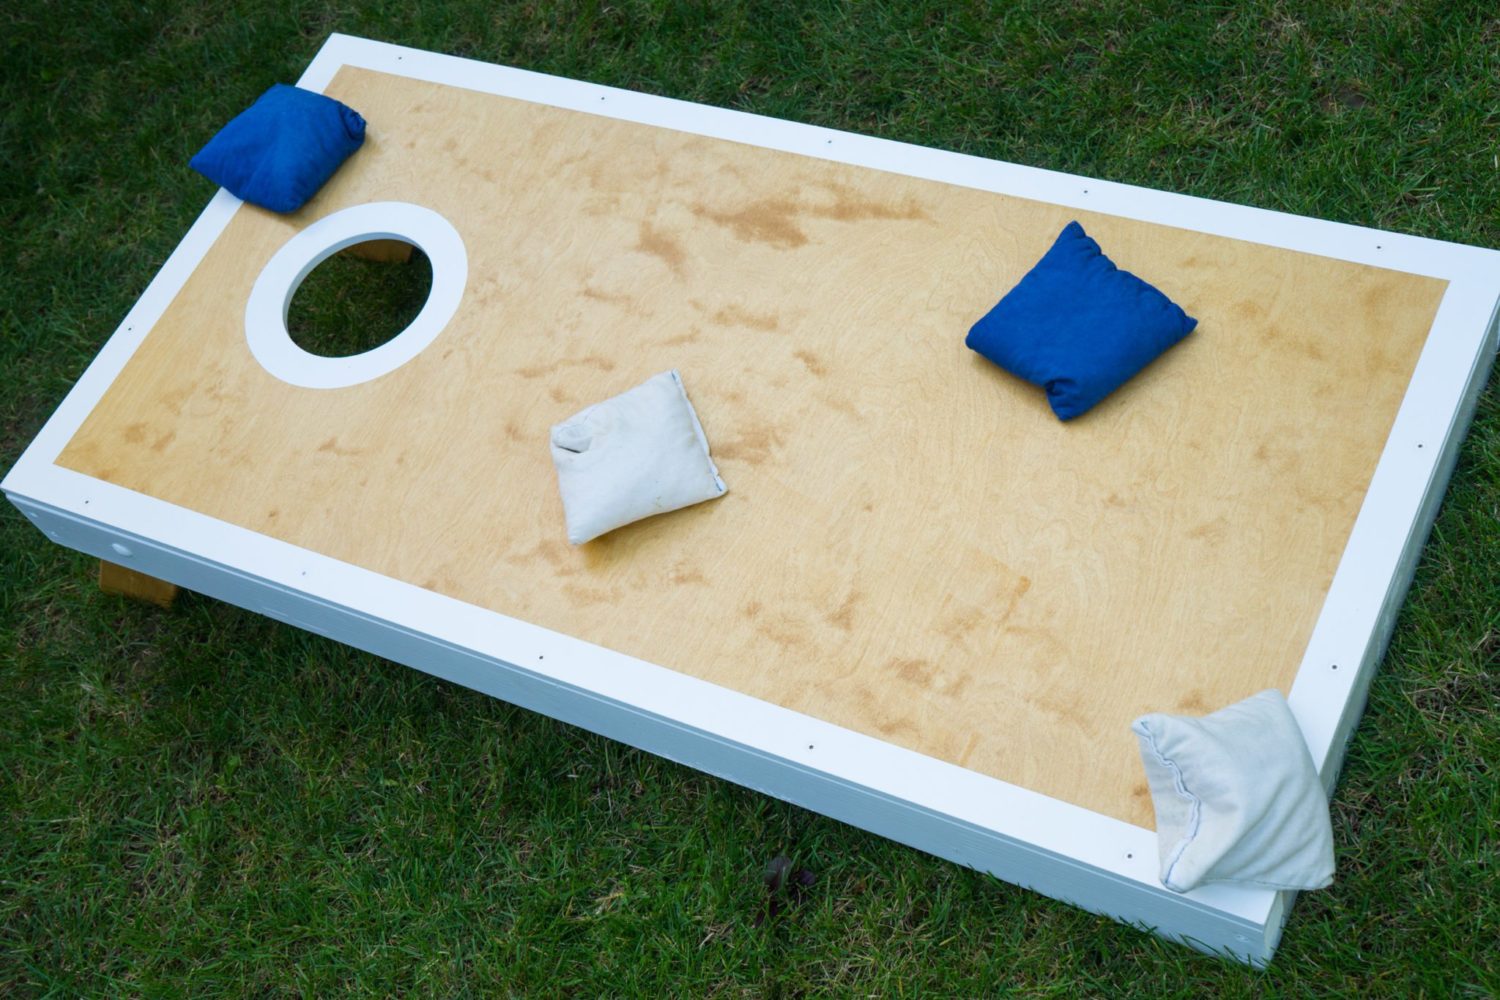 Where Did The Game Cornhole Come From?